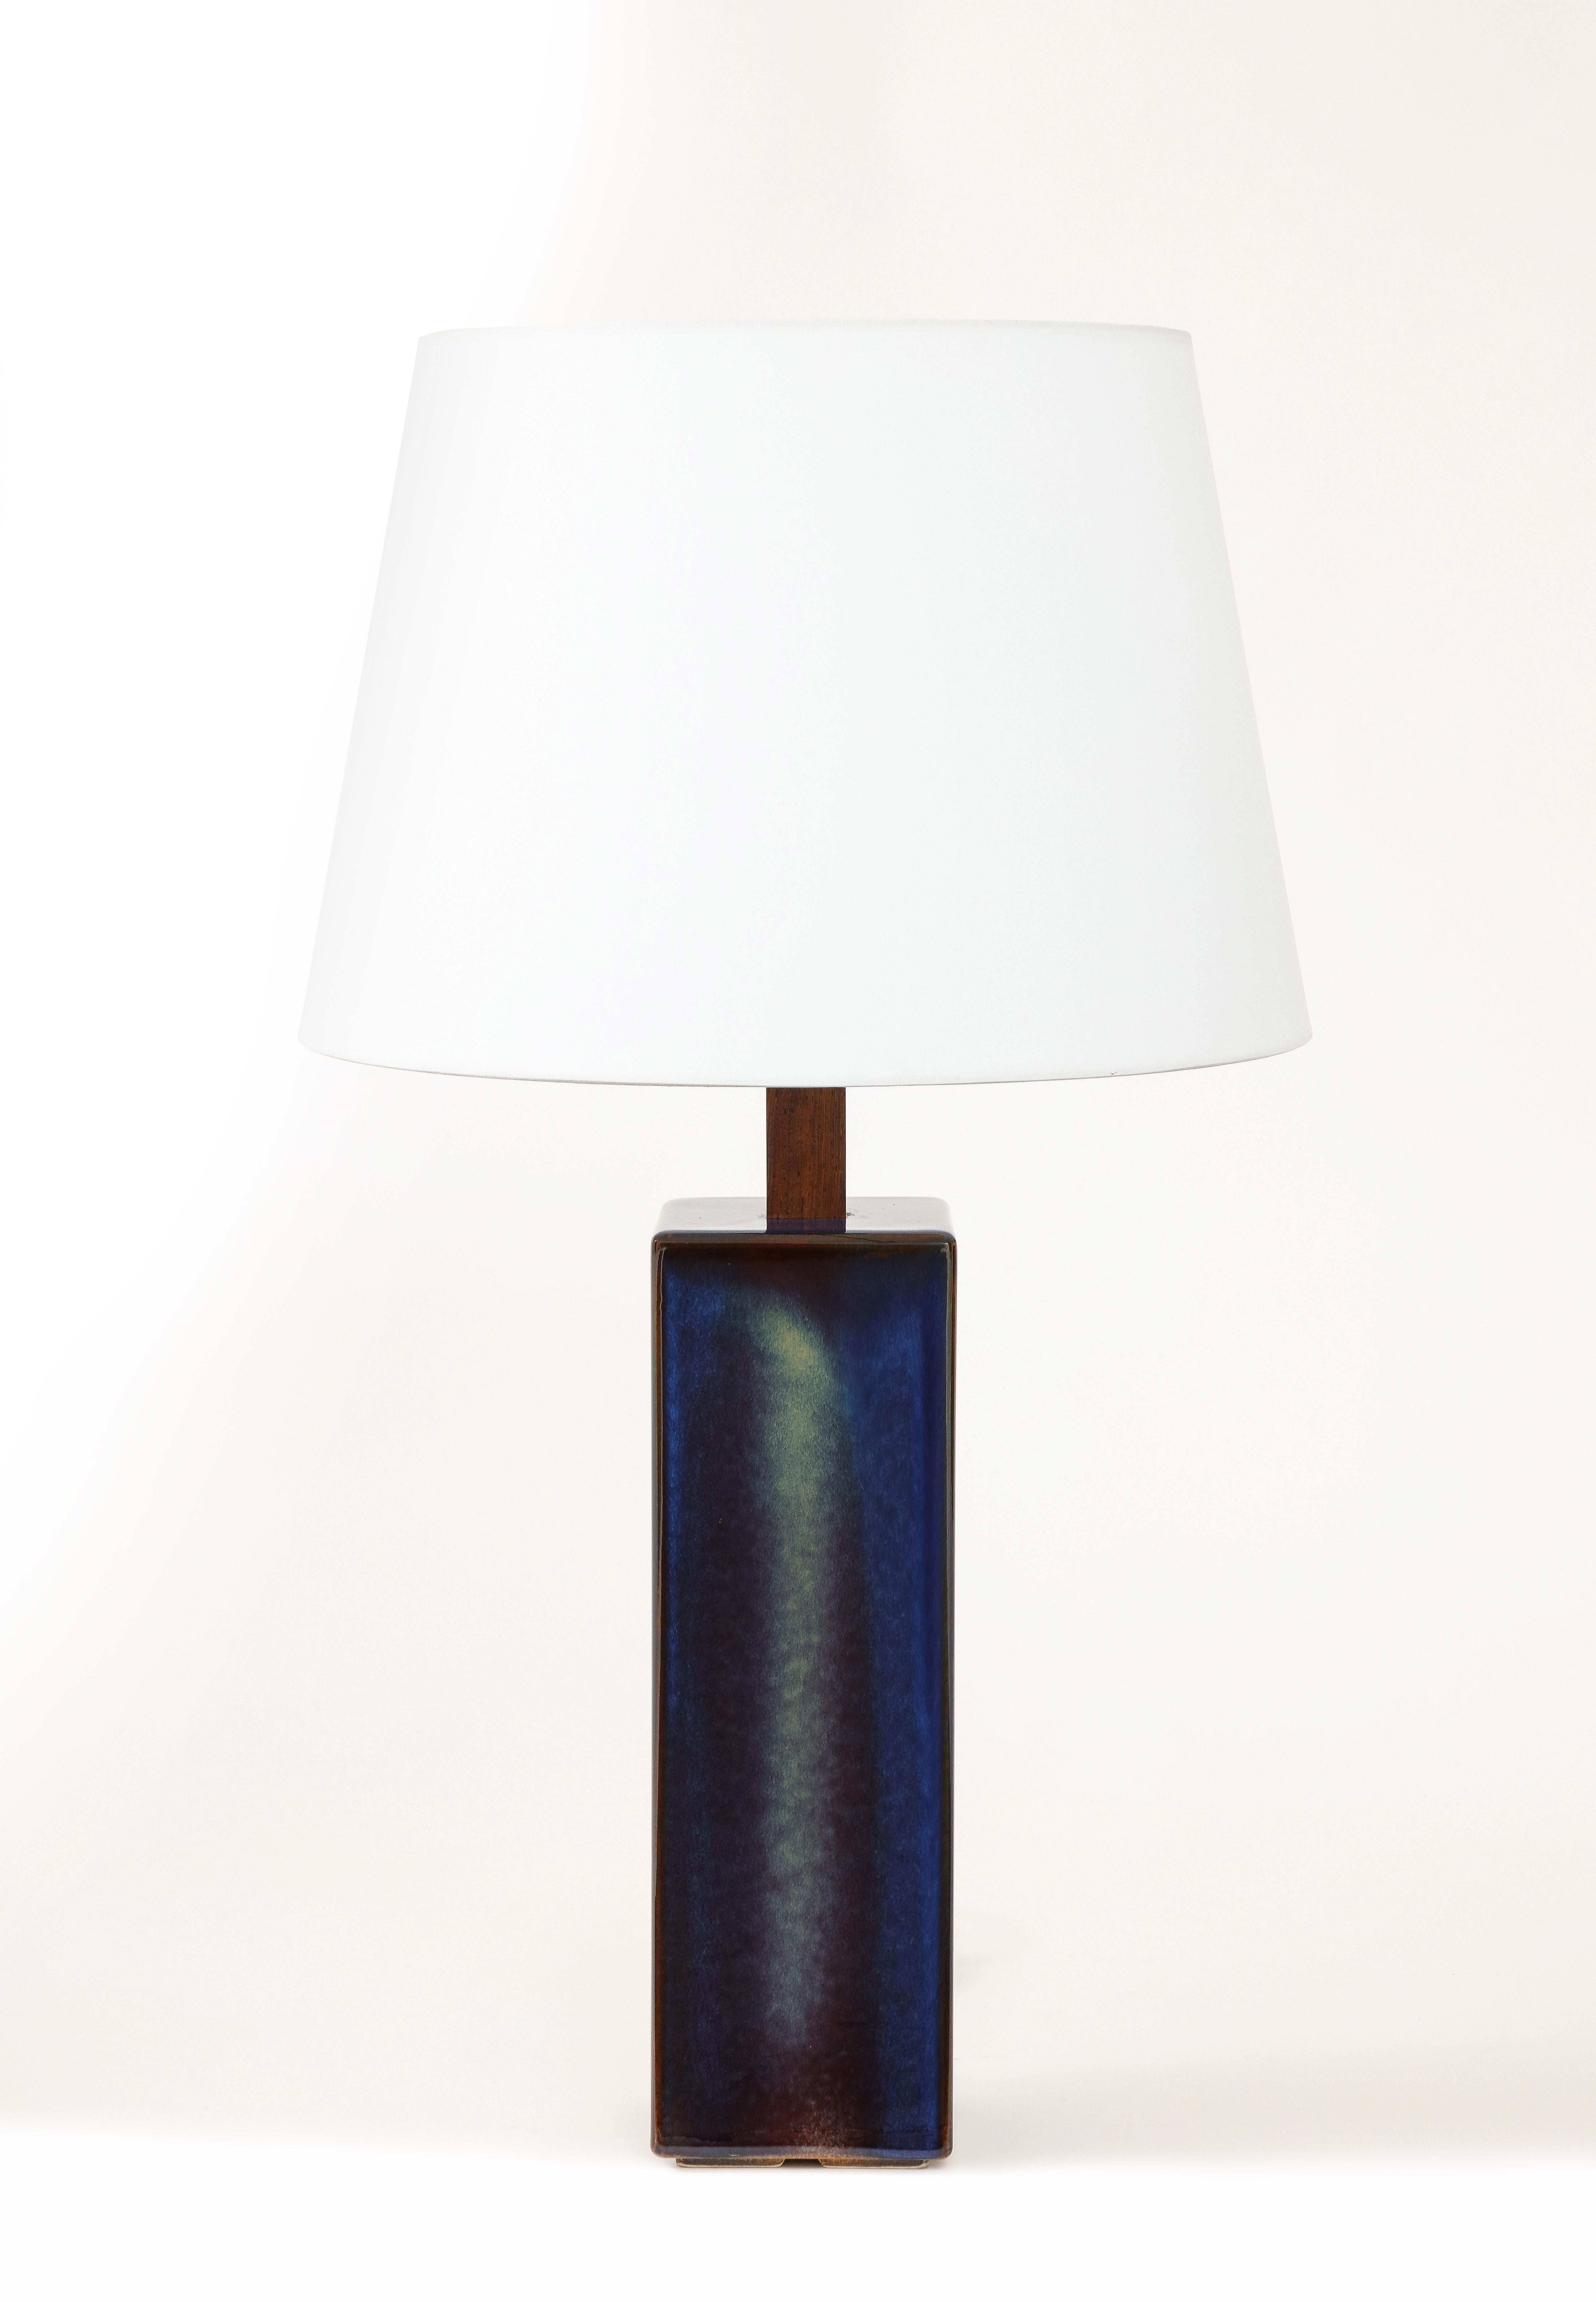 Wonderful Blue Table Lamp from Denmark, signed

Note: Seen in an episode of SEX EDUCATION.